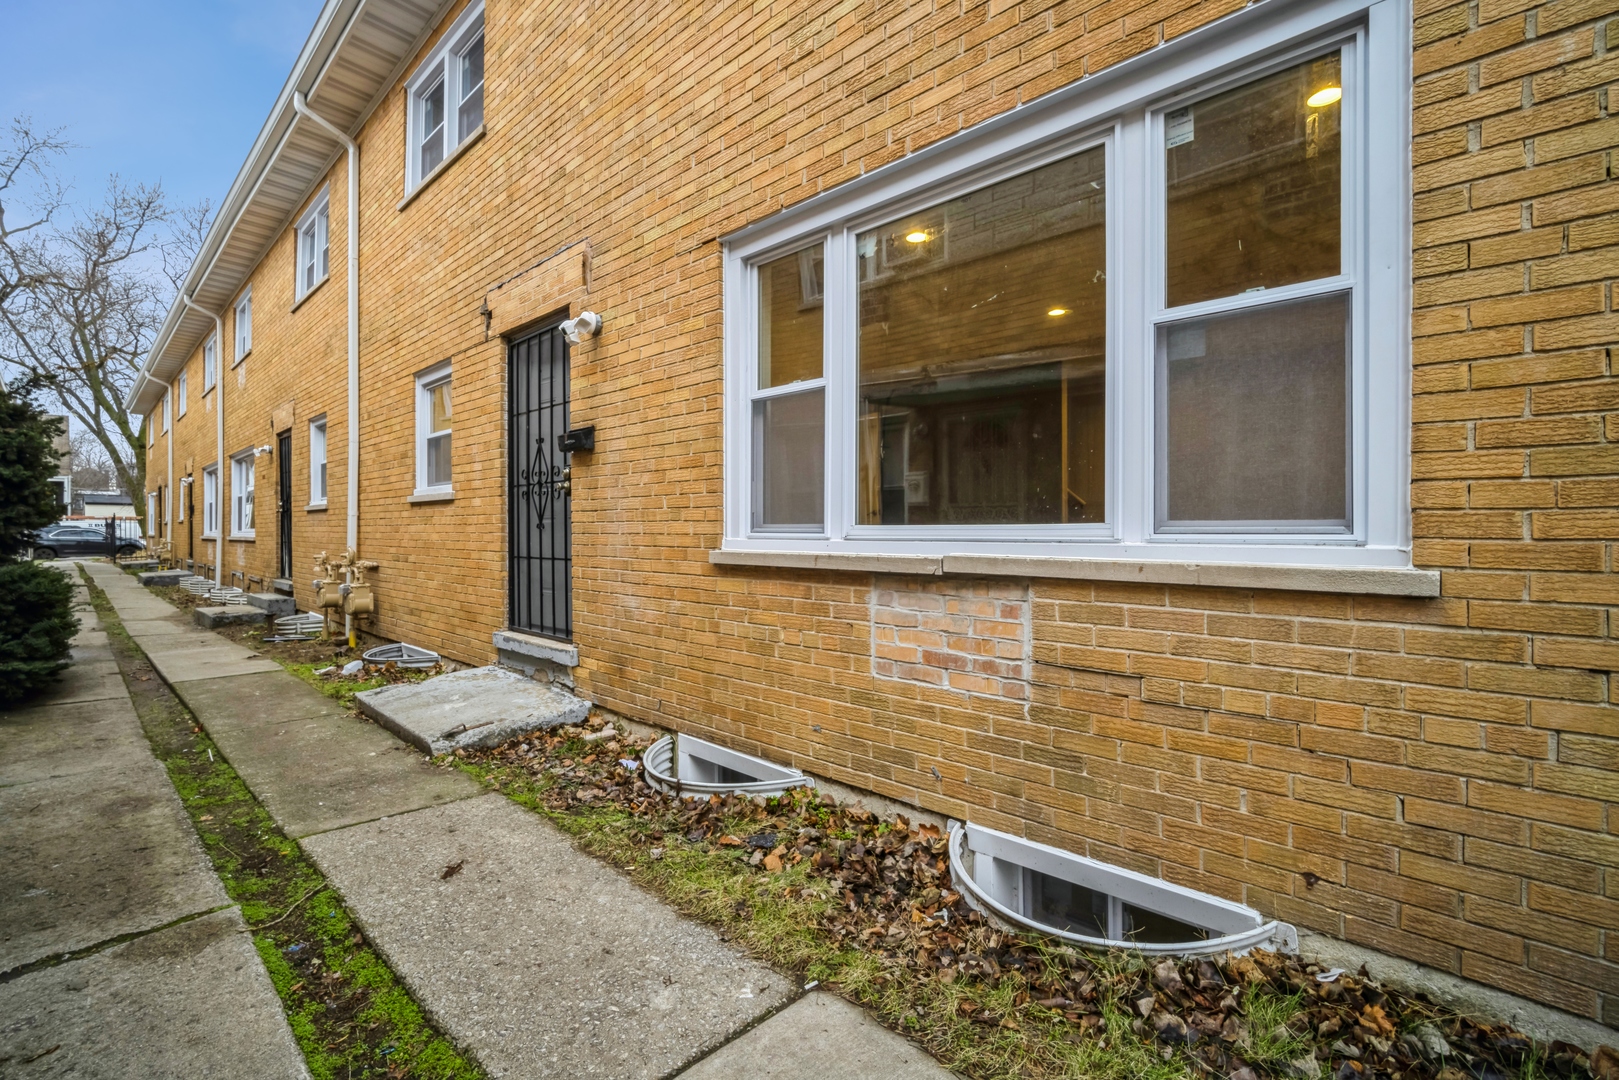 View Chicago, IL 60649 townhome